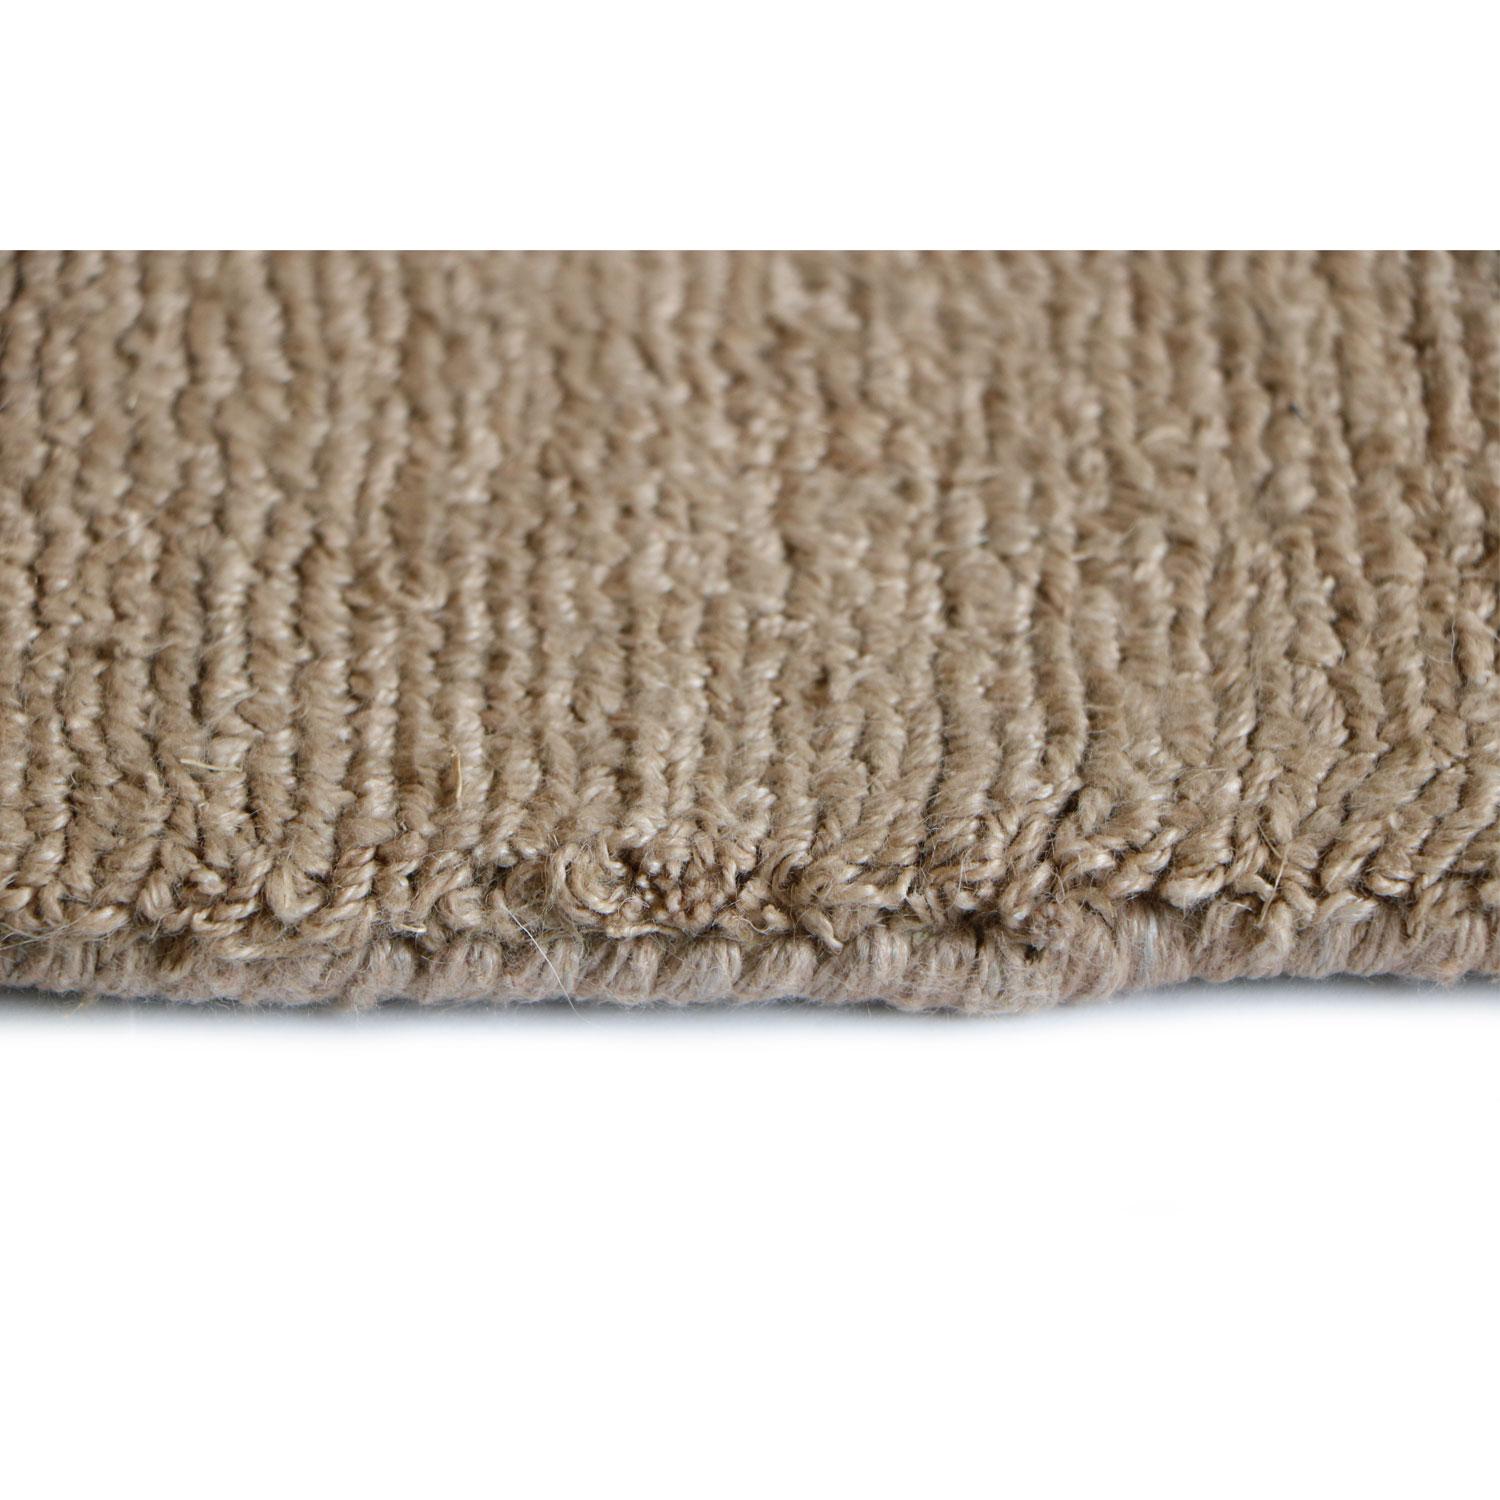 Indian Contemporary Antibacterial Natural Linen Rug by Deanna Comellini 200x300 cm For Sale